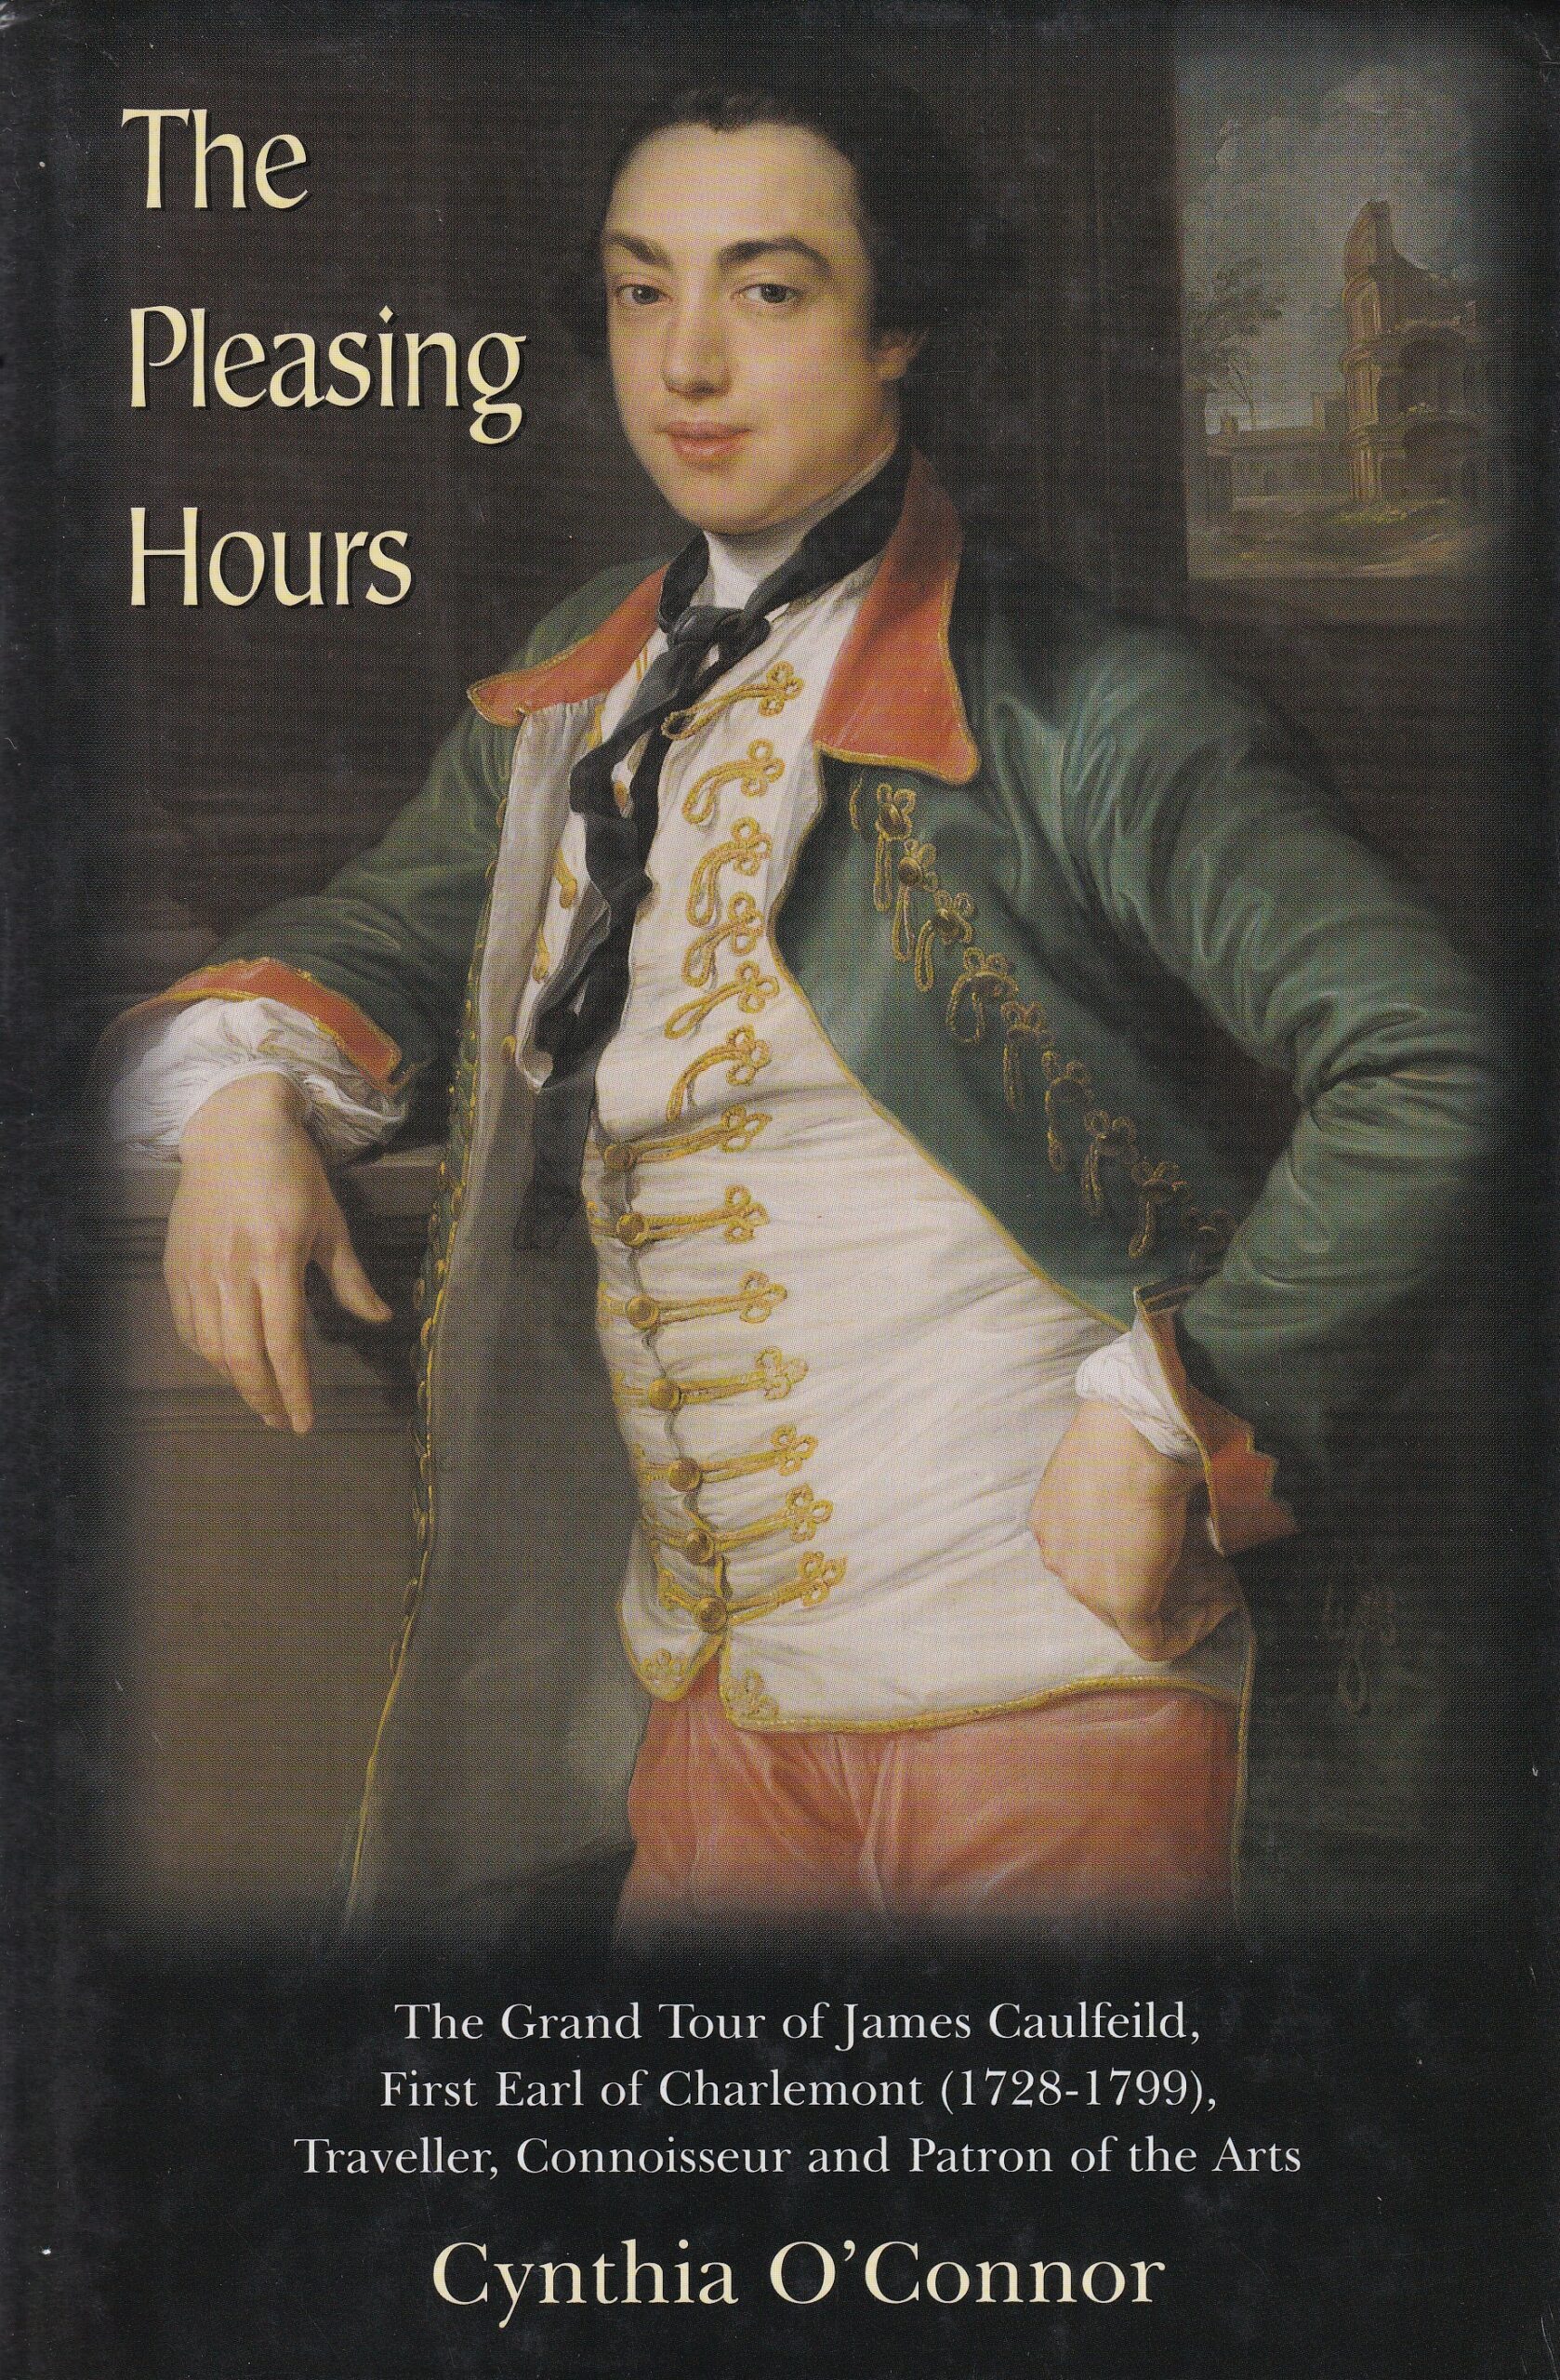 The Pleasing Hours: The Grand Tour of James Caulfield, First Earl of Charlemont (1728-1799), Traveller, Connoisseur and Patron of the Arts by Cynthia O'Connor